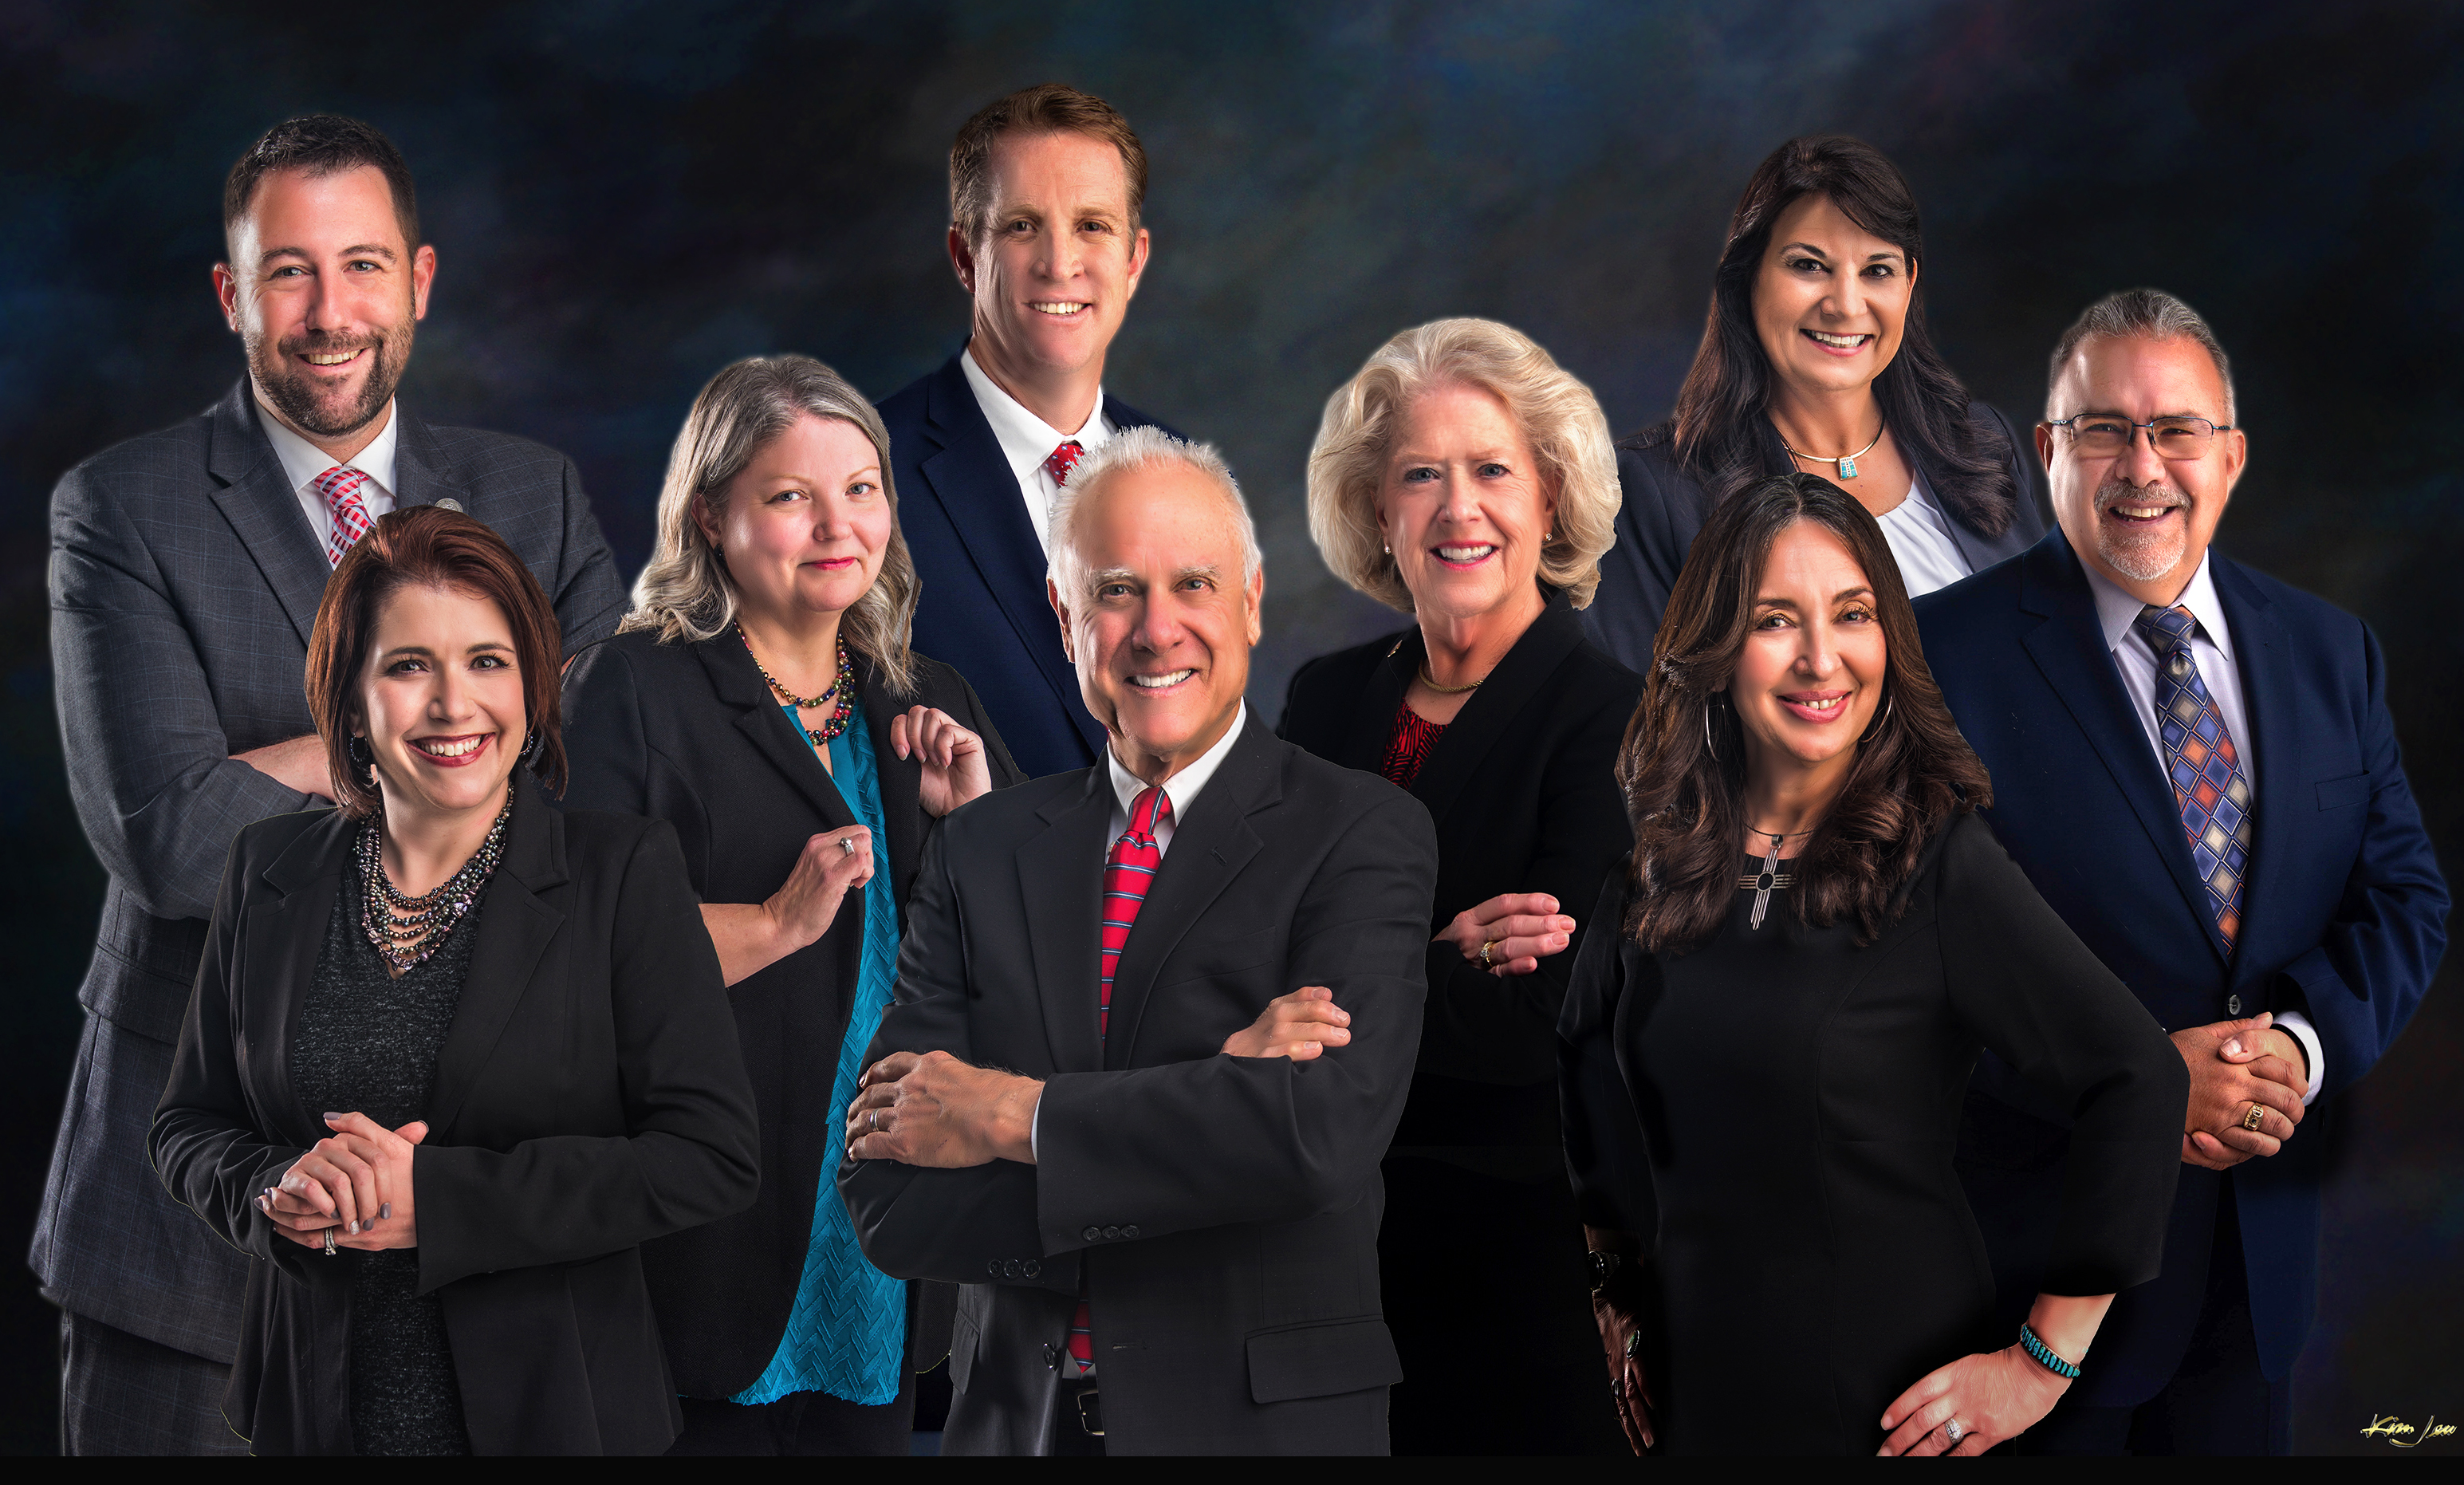 The portraits of all nine members of the Albuquerque City Council.